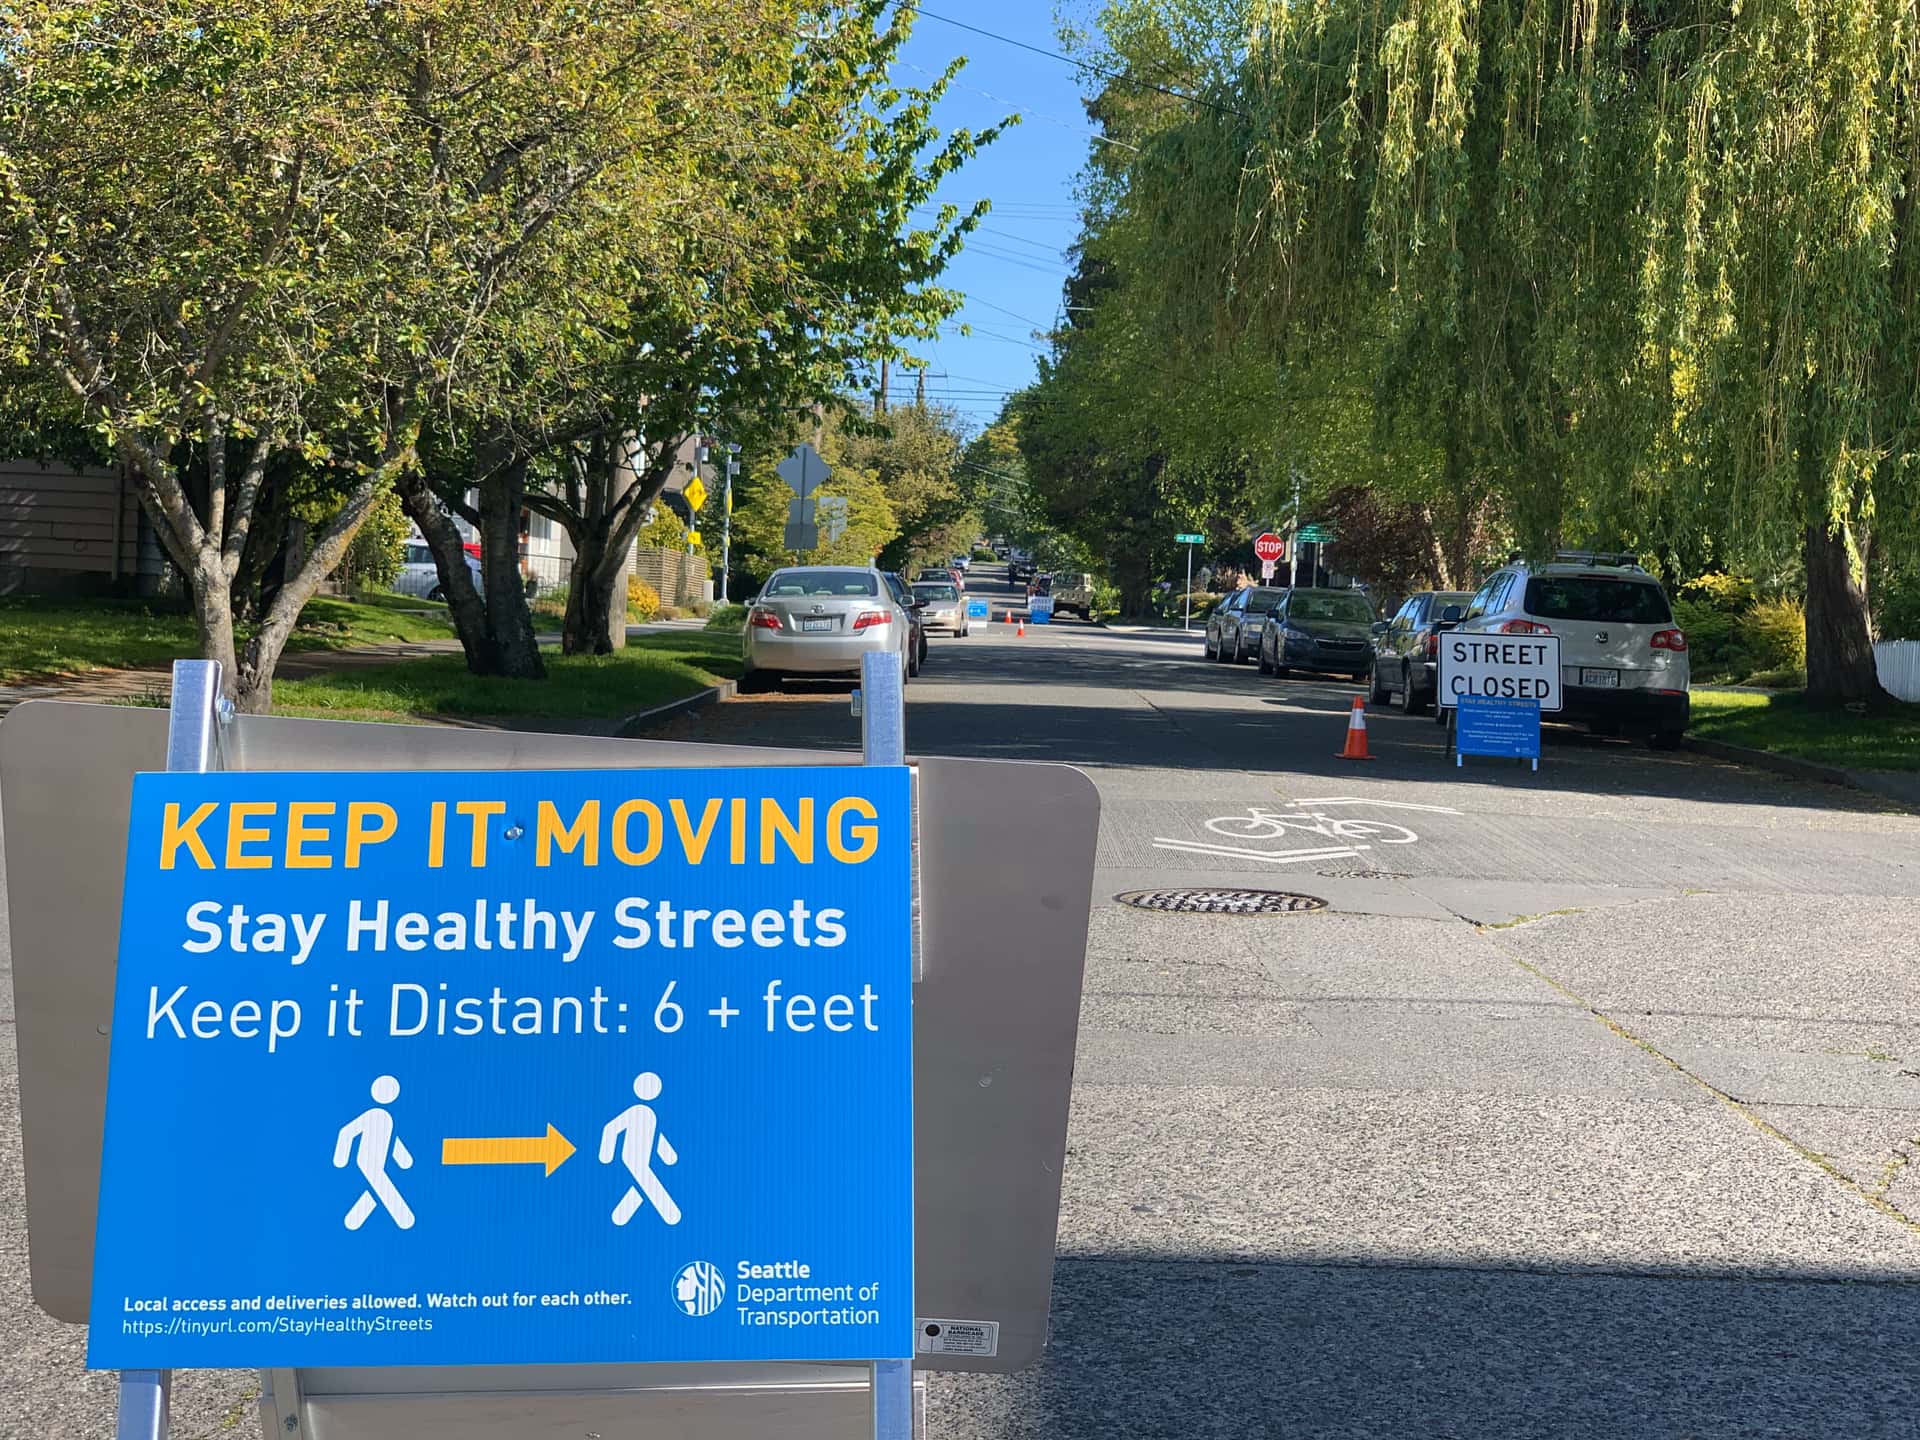 “Stay Healthy” street signage reading “Street Closed” and “Keep it Moving; Stay Healthy Streets; Keep it Distant: 6+ feet”